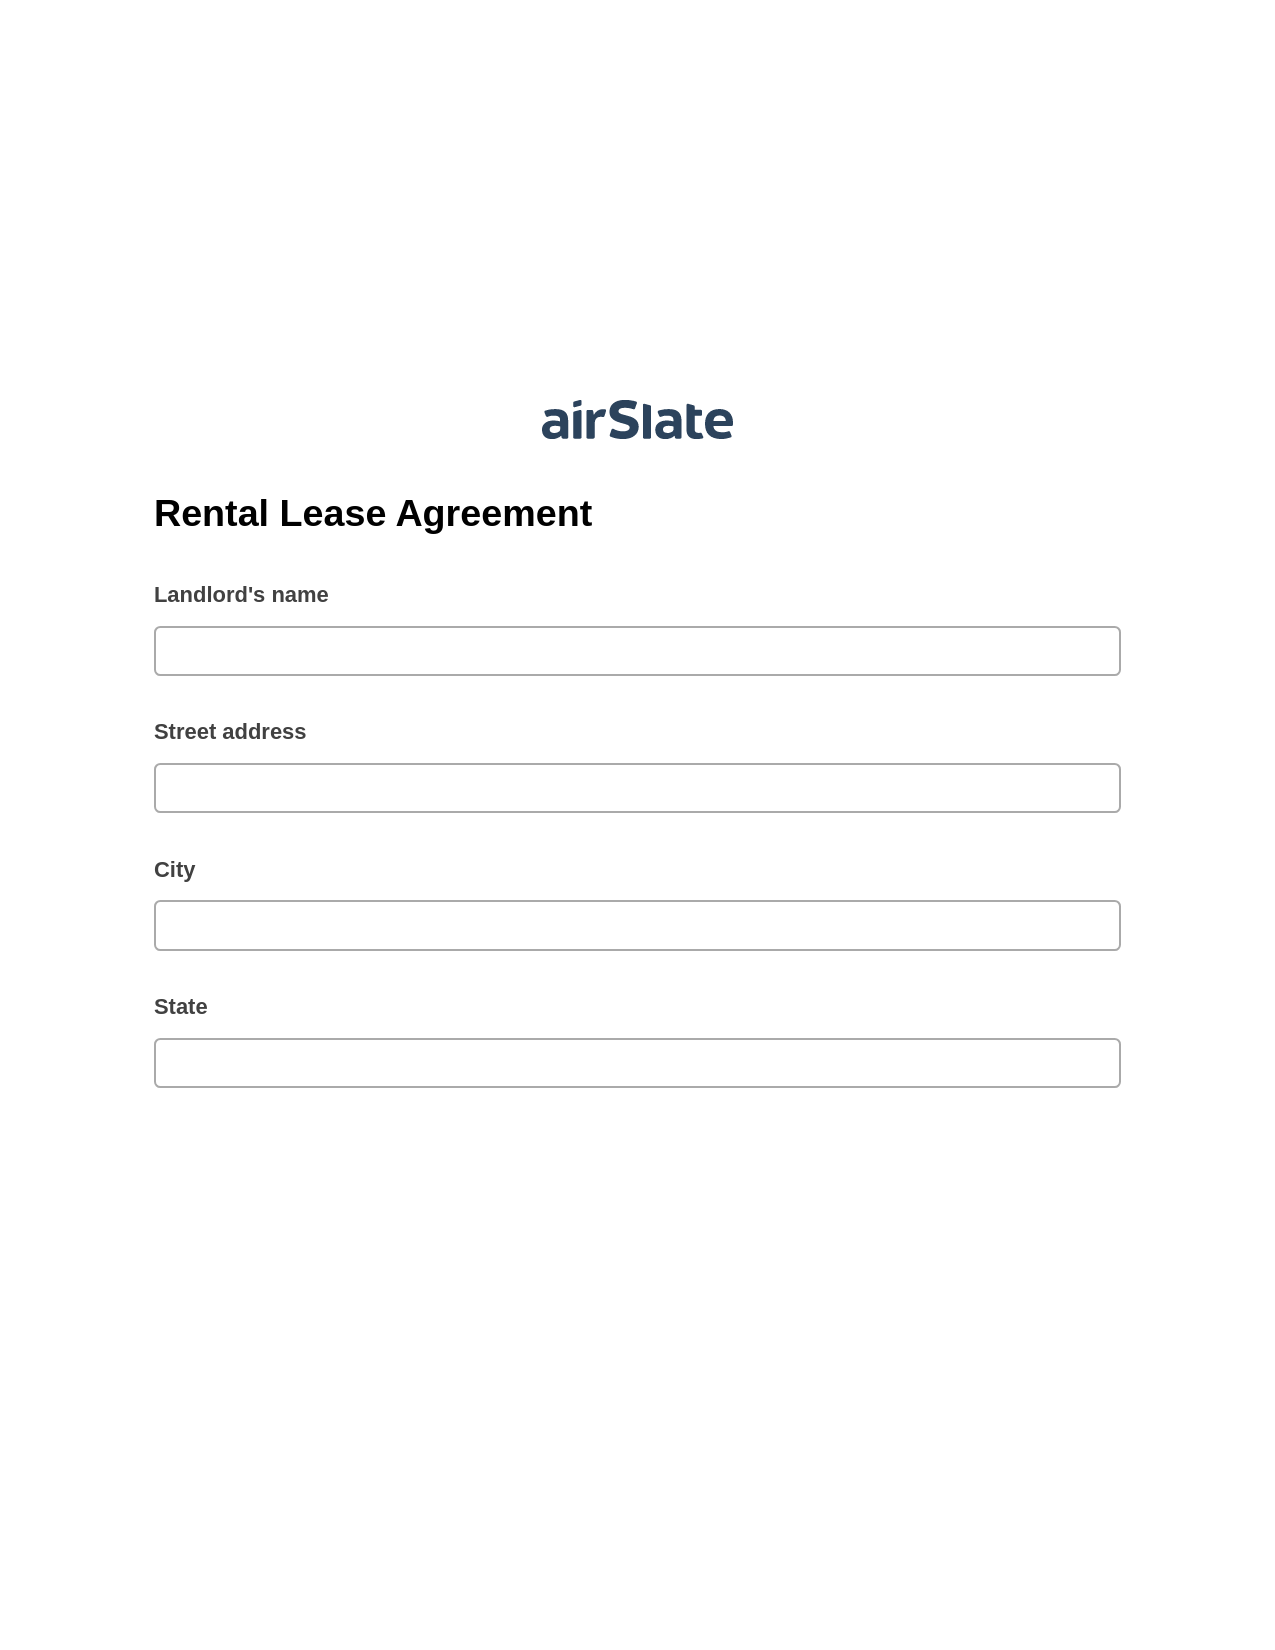 Rental Lease Agreement Pre-fill Slate from MS Dynamics 365 Records Bot, Create Slate every Google Sheet Update Bot, Export to Formstack Documents Bot